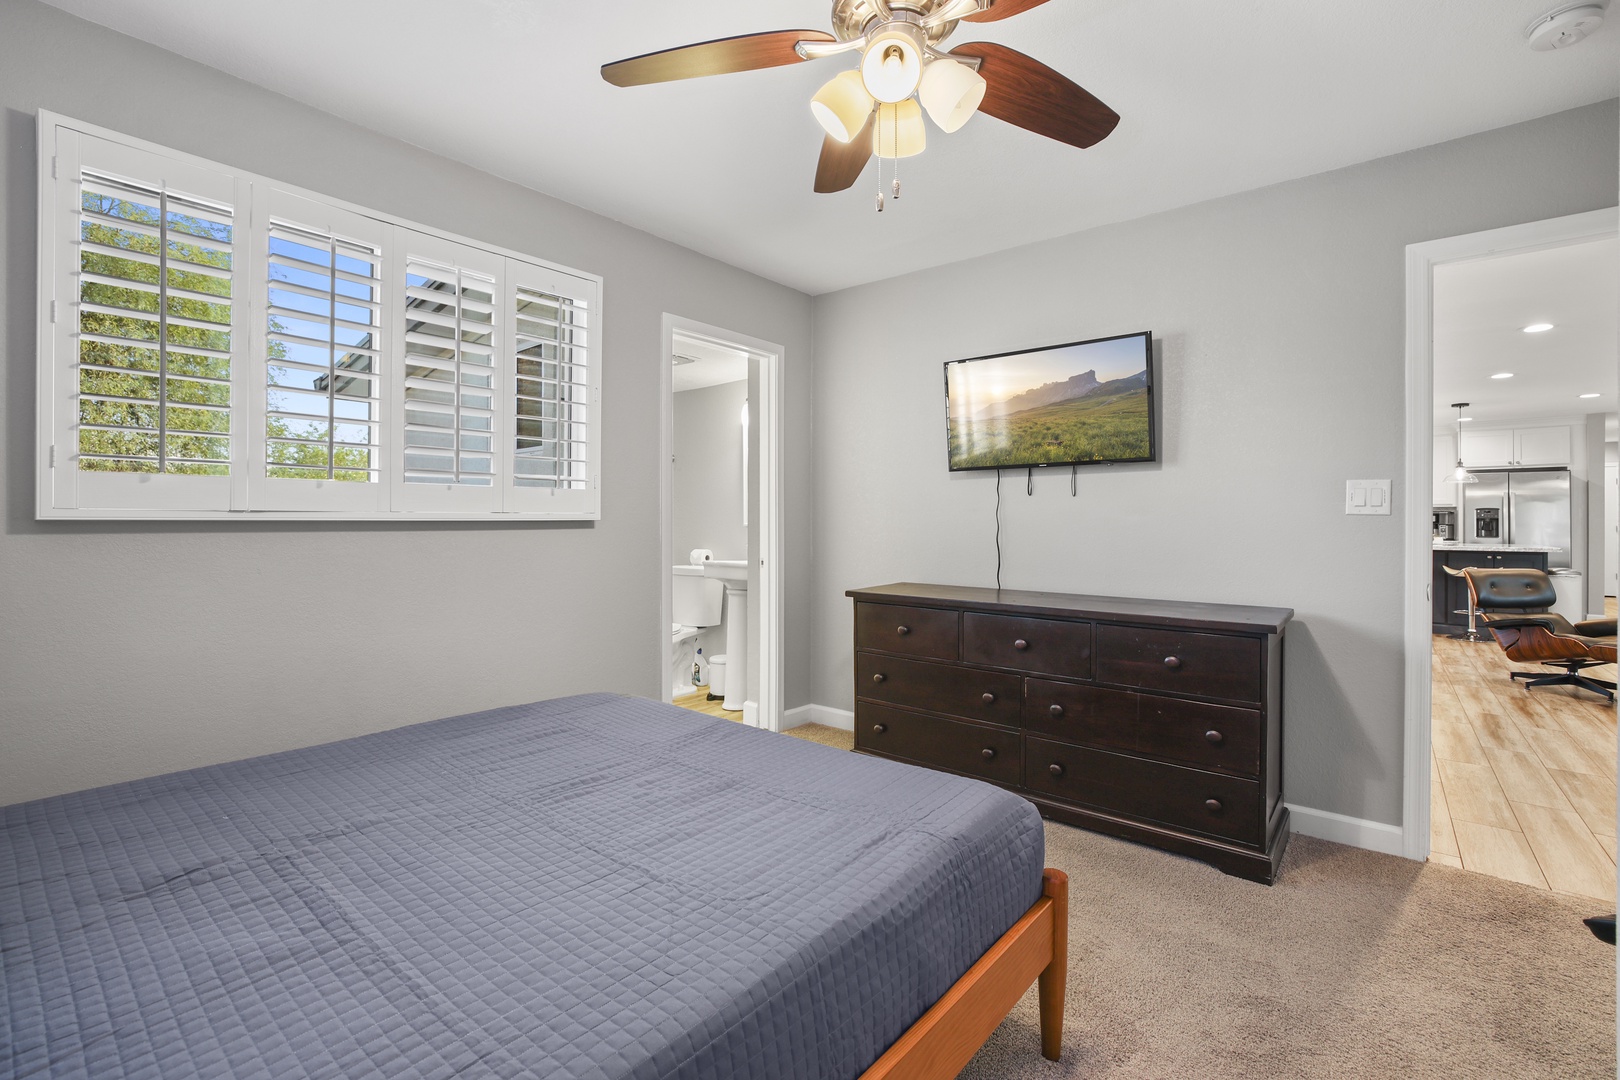 Three spacious bedrooms with beds covered in comfortable linens.